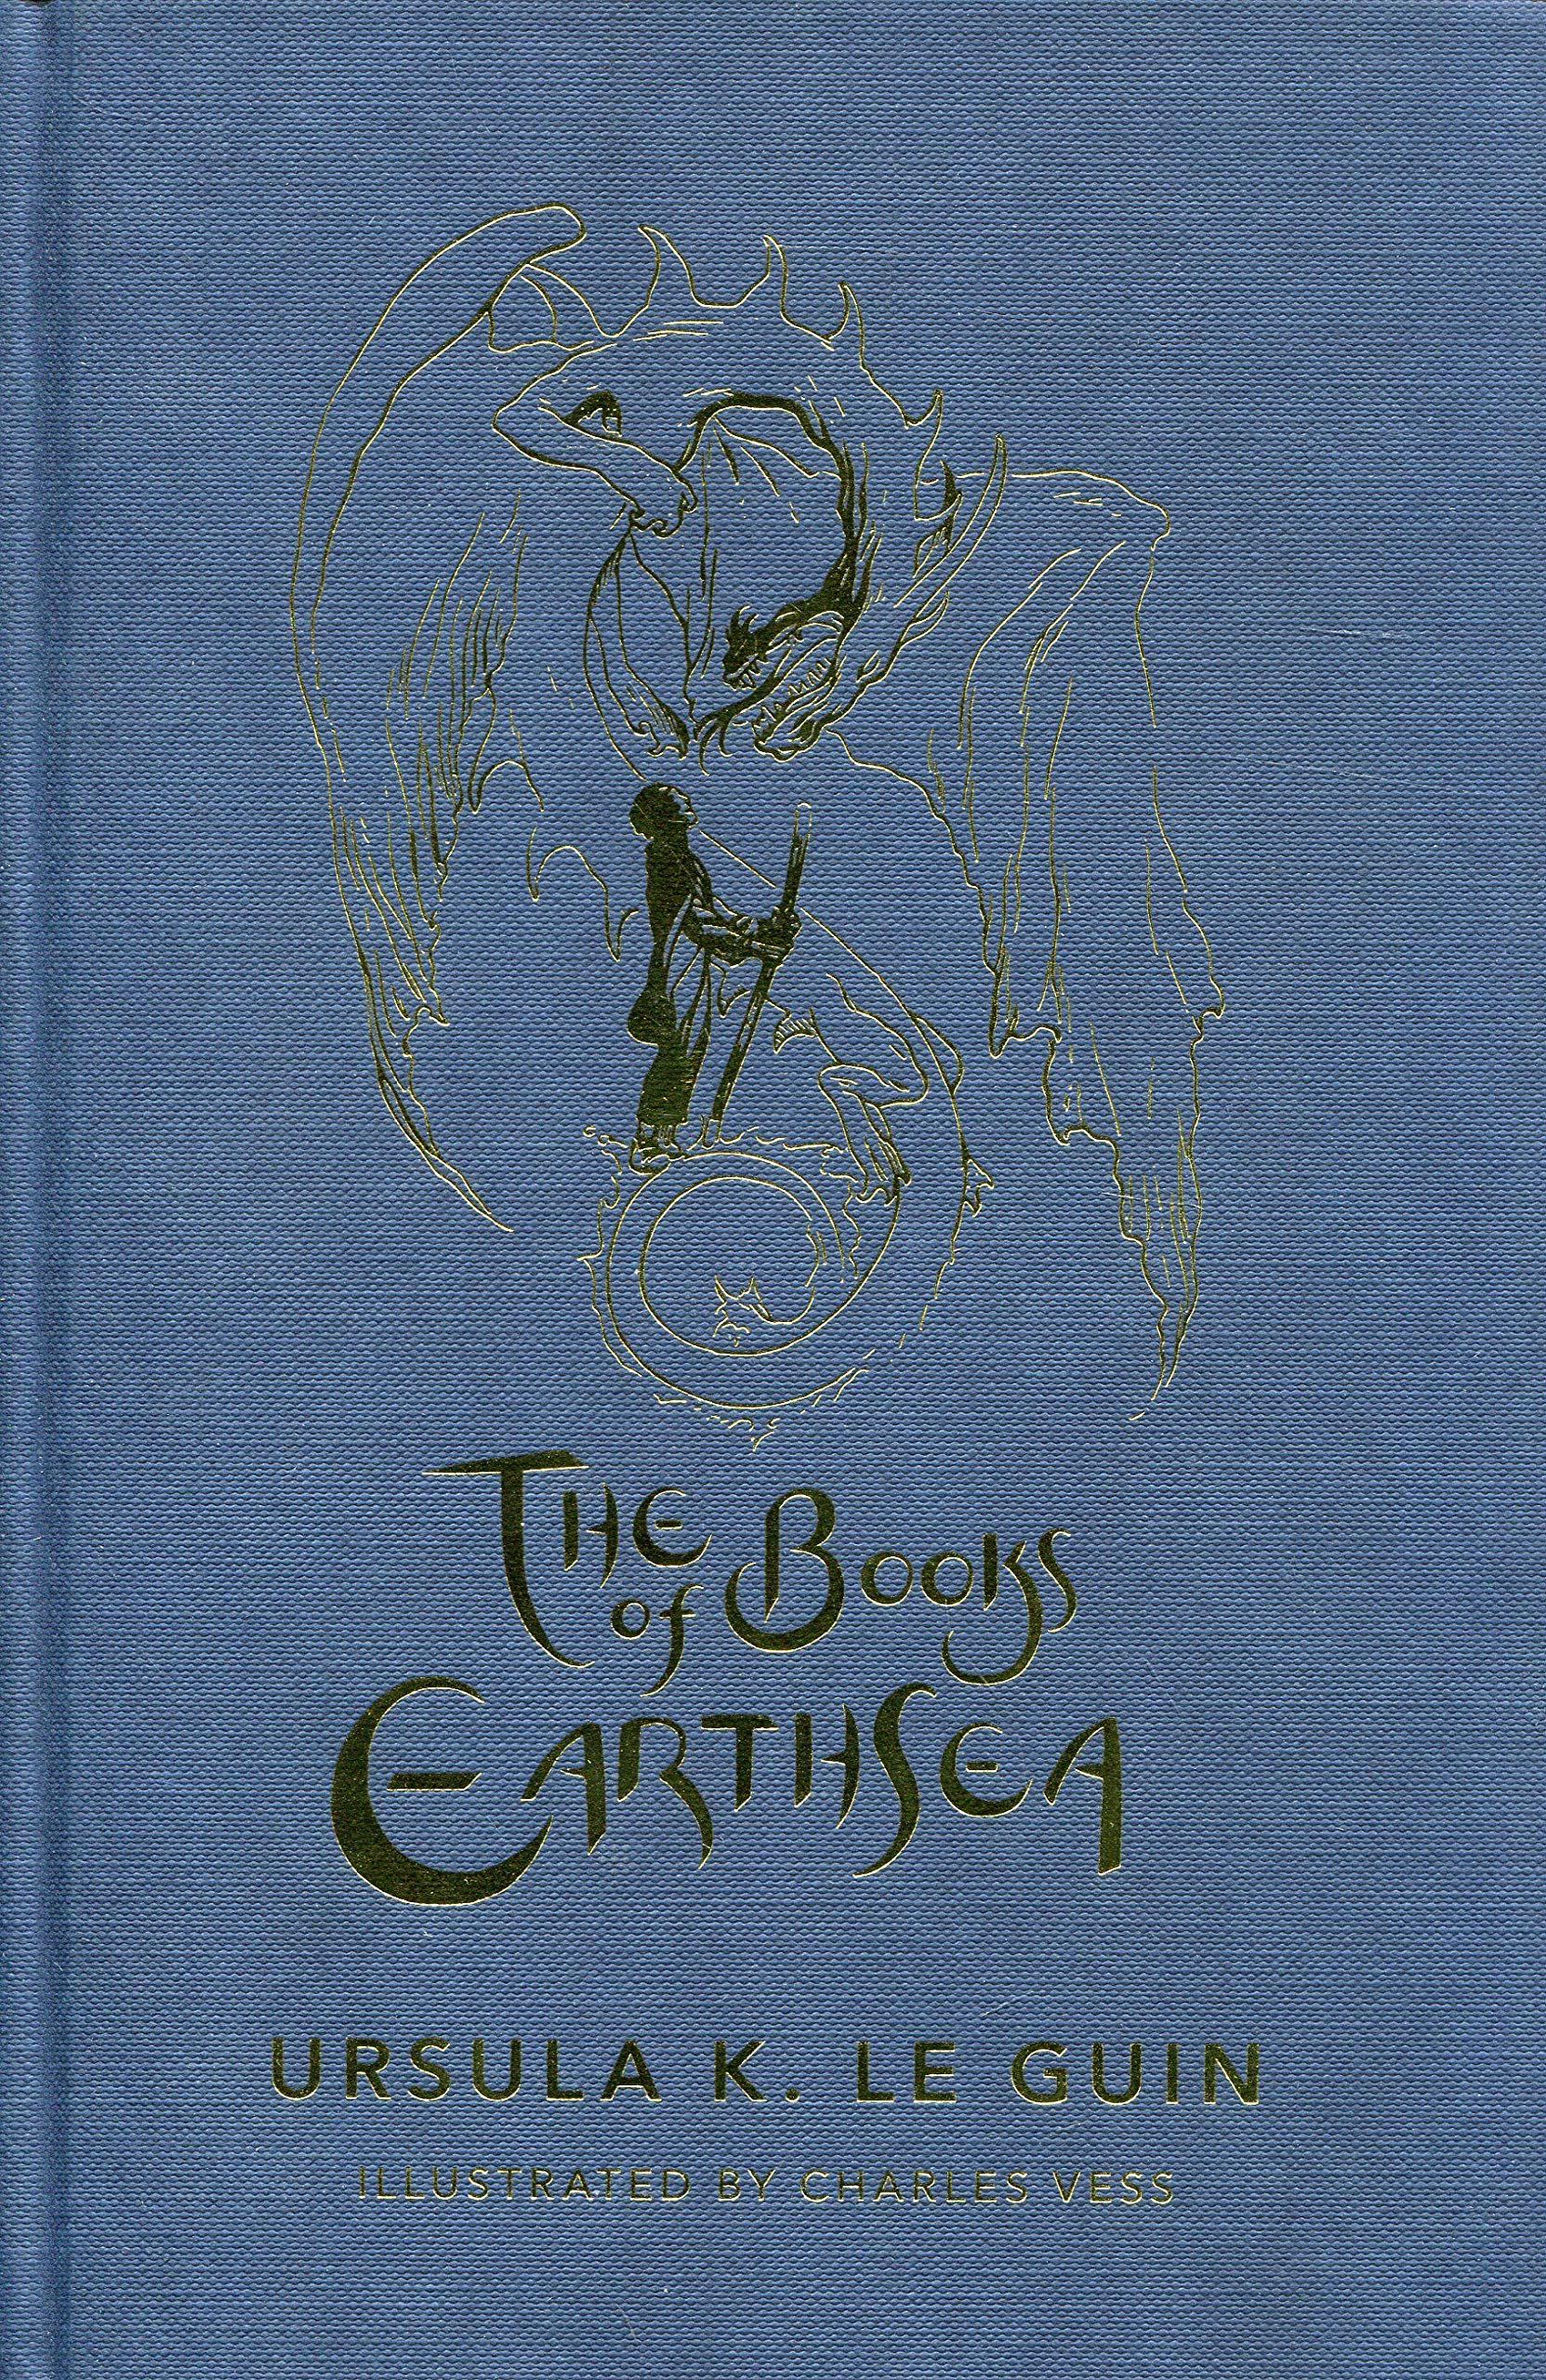 The Books of Earthsea - The Complete Illustrated Edition